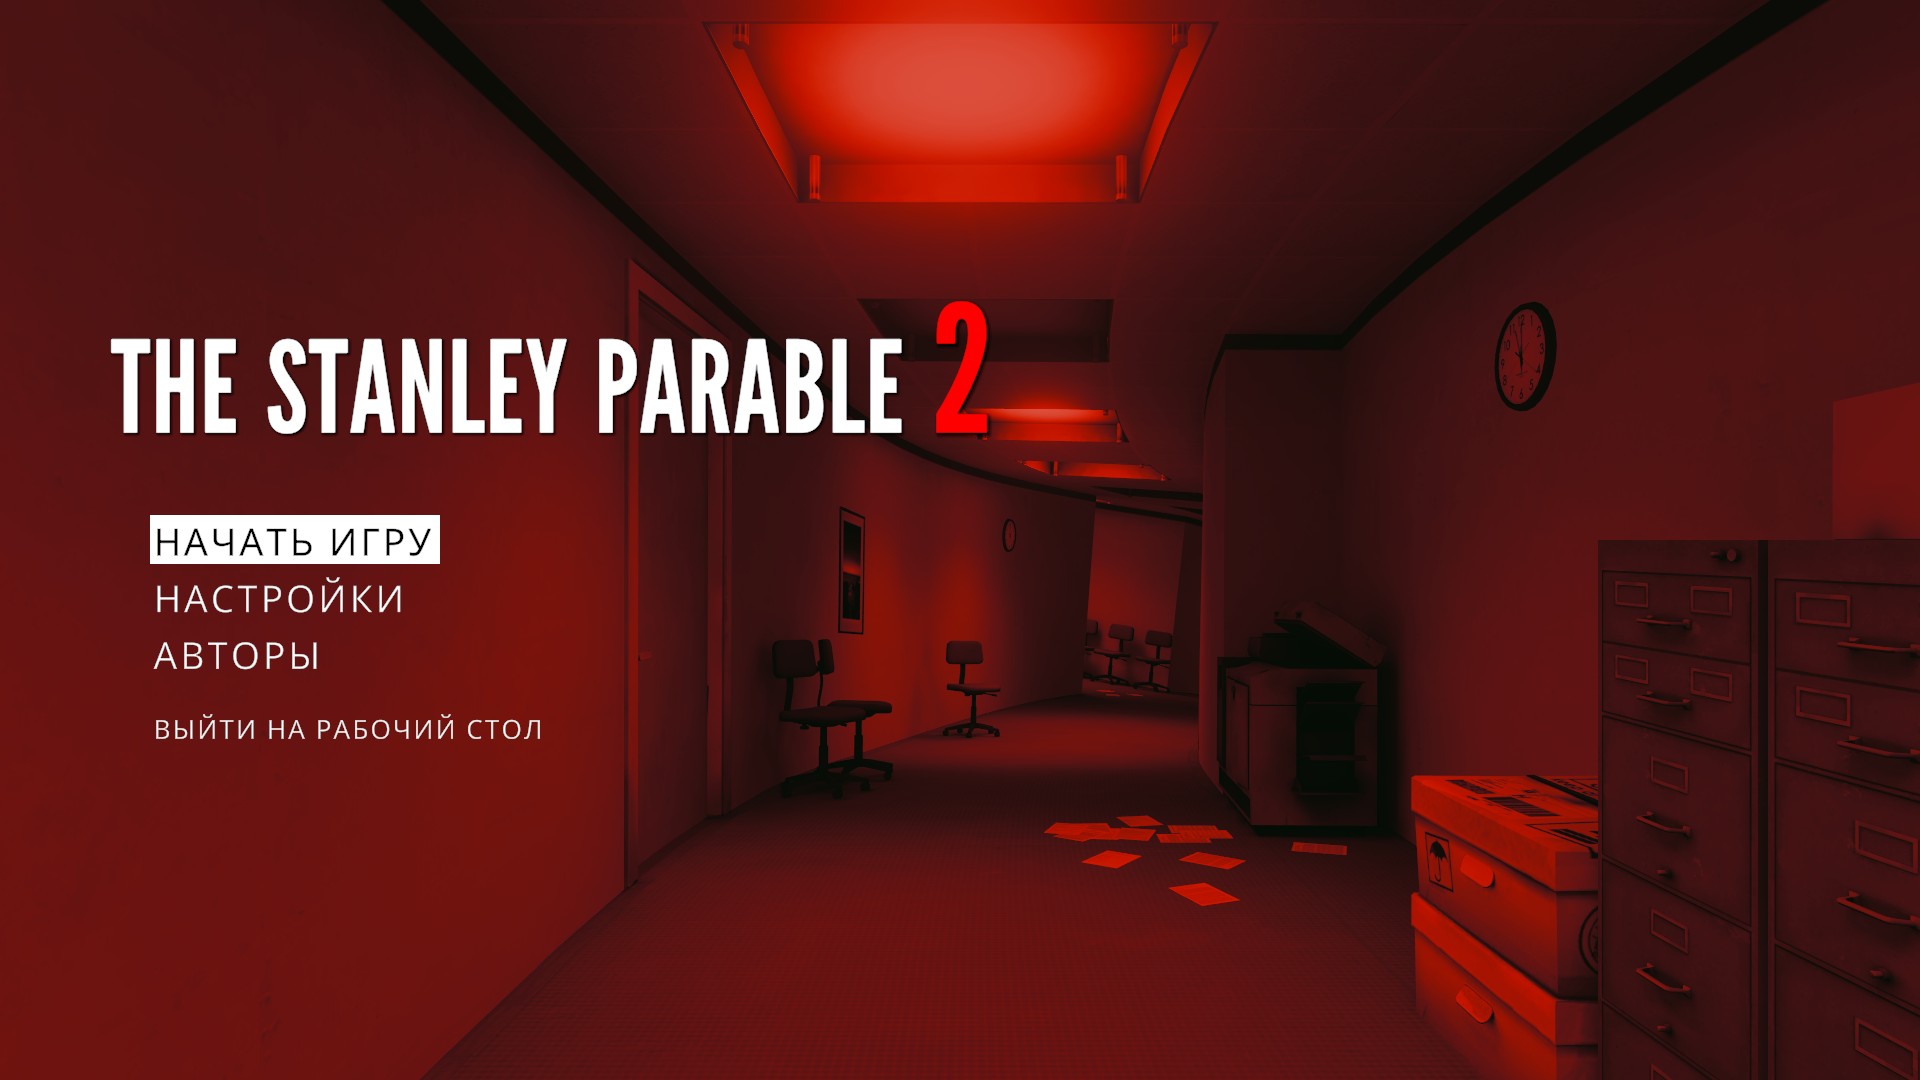 The Stanley Parable: Ultra Deluxe. Stanley Parable Ultra Deluxe Art. The Stanley Parable Ultra Deluxe арт. Stanley Parable Ultra Deluxe зона воспоминаний. Stanley parable deluxe концовки